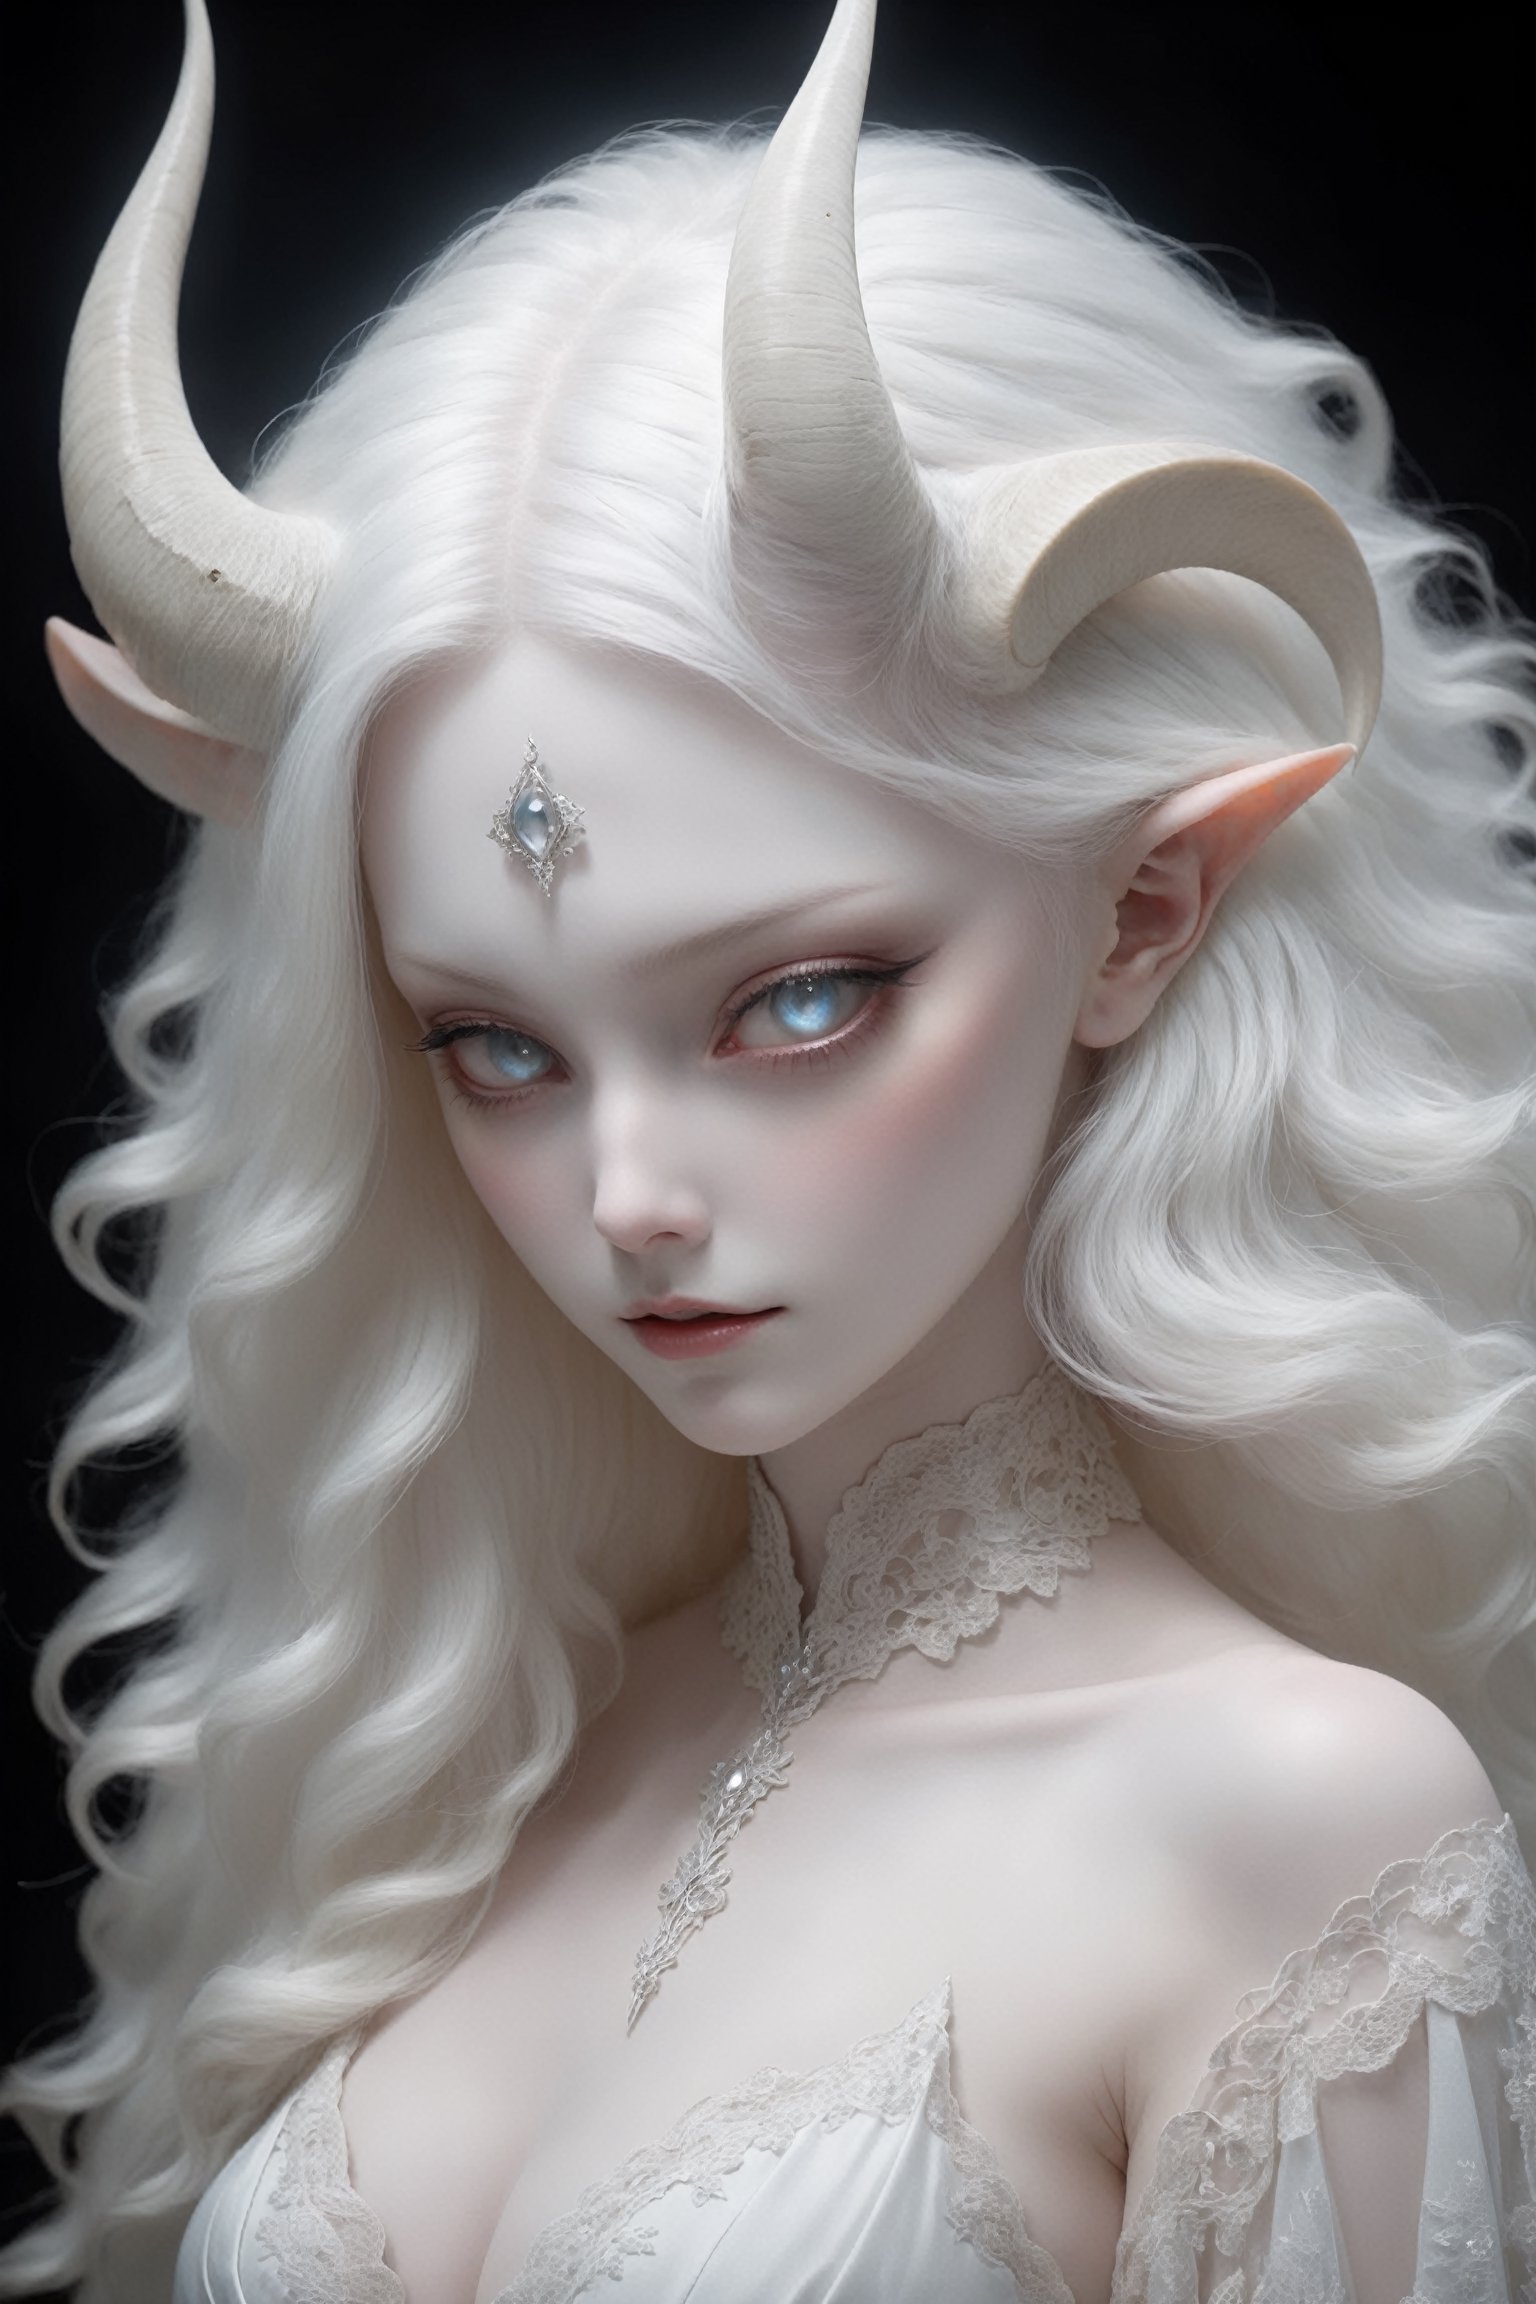 (upper body), (long intricate horns:1.2), sensual albino demon girl with enchantingly beautiful, alabaster skin, thinking, thoughtful, A benevolent smile, girl has beautiful deep eyes, soft expression, Depth and Dimension in the Pupils, {{{naked breasts}}}, Her porcelain-like white skin reflects an almost celestial glow, highlighting her ethereal nature, Every detail of her divine lace costume is meticulously crafted, adorned with jewels that sparkle with a divine radiance, mysterious smoky background, an aura of supernatural allure, ornate jewels, mesmerizing dance of light that enhances her divine presence, moonlit garden, mystical realm, the scene Illuminated  with soft enchanting light to accentuate the magical and mysterious atmosphere, goth person, realistic, Wonder of Art and Beauty, ghost person,ghost person,F41Arm0rXL ,DonMM4g1cXL 